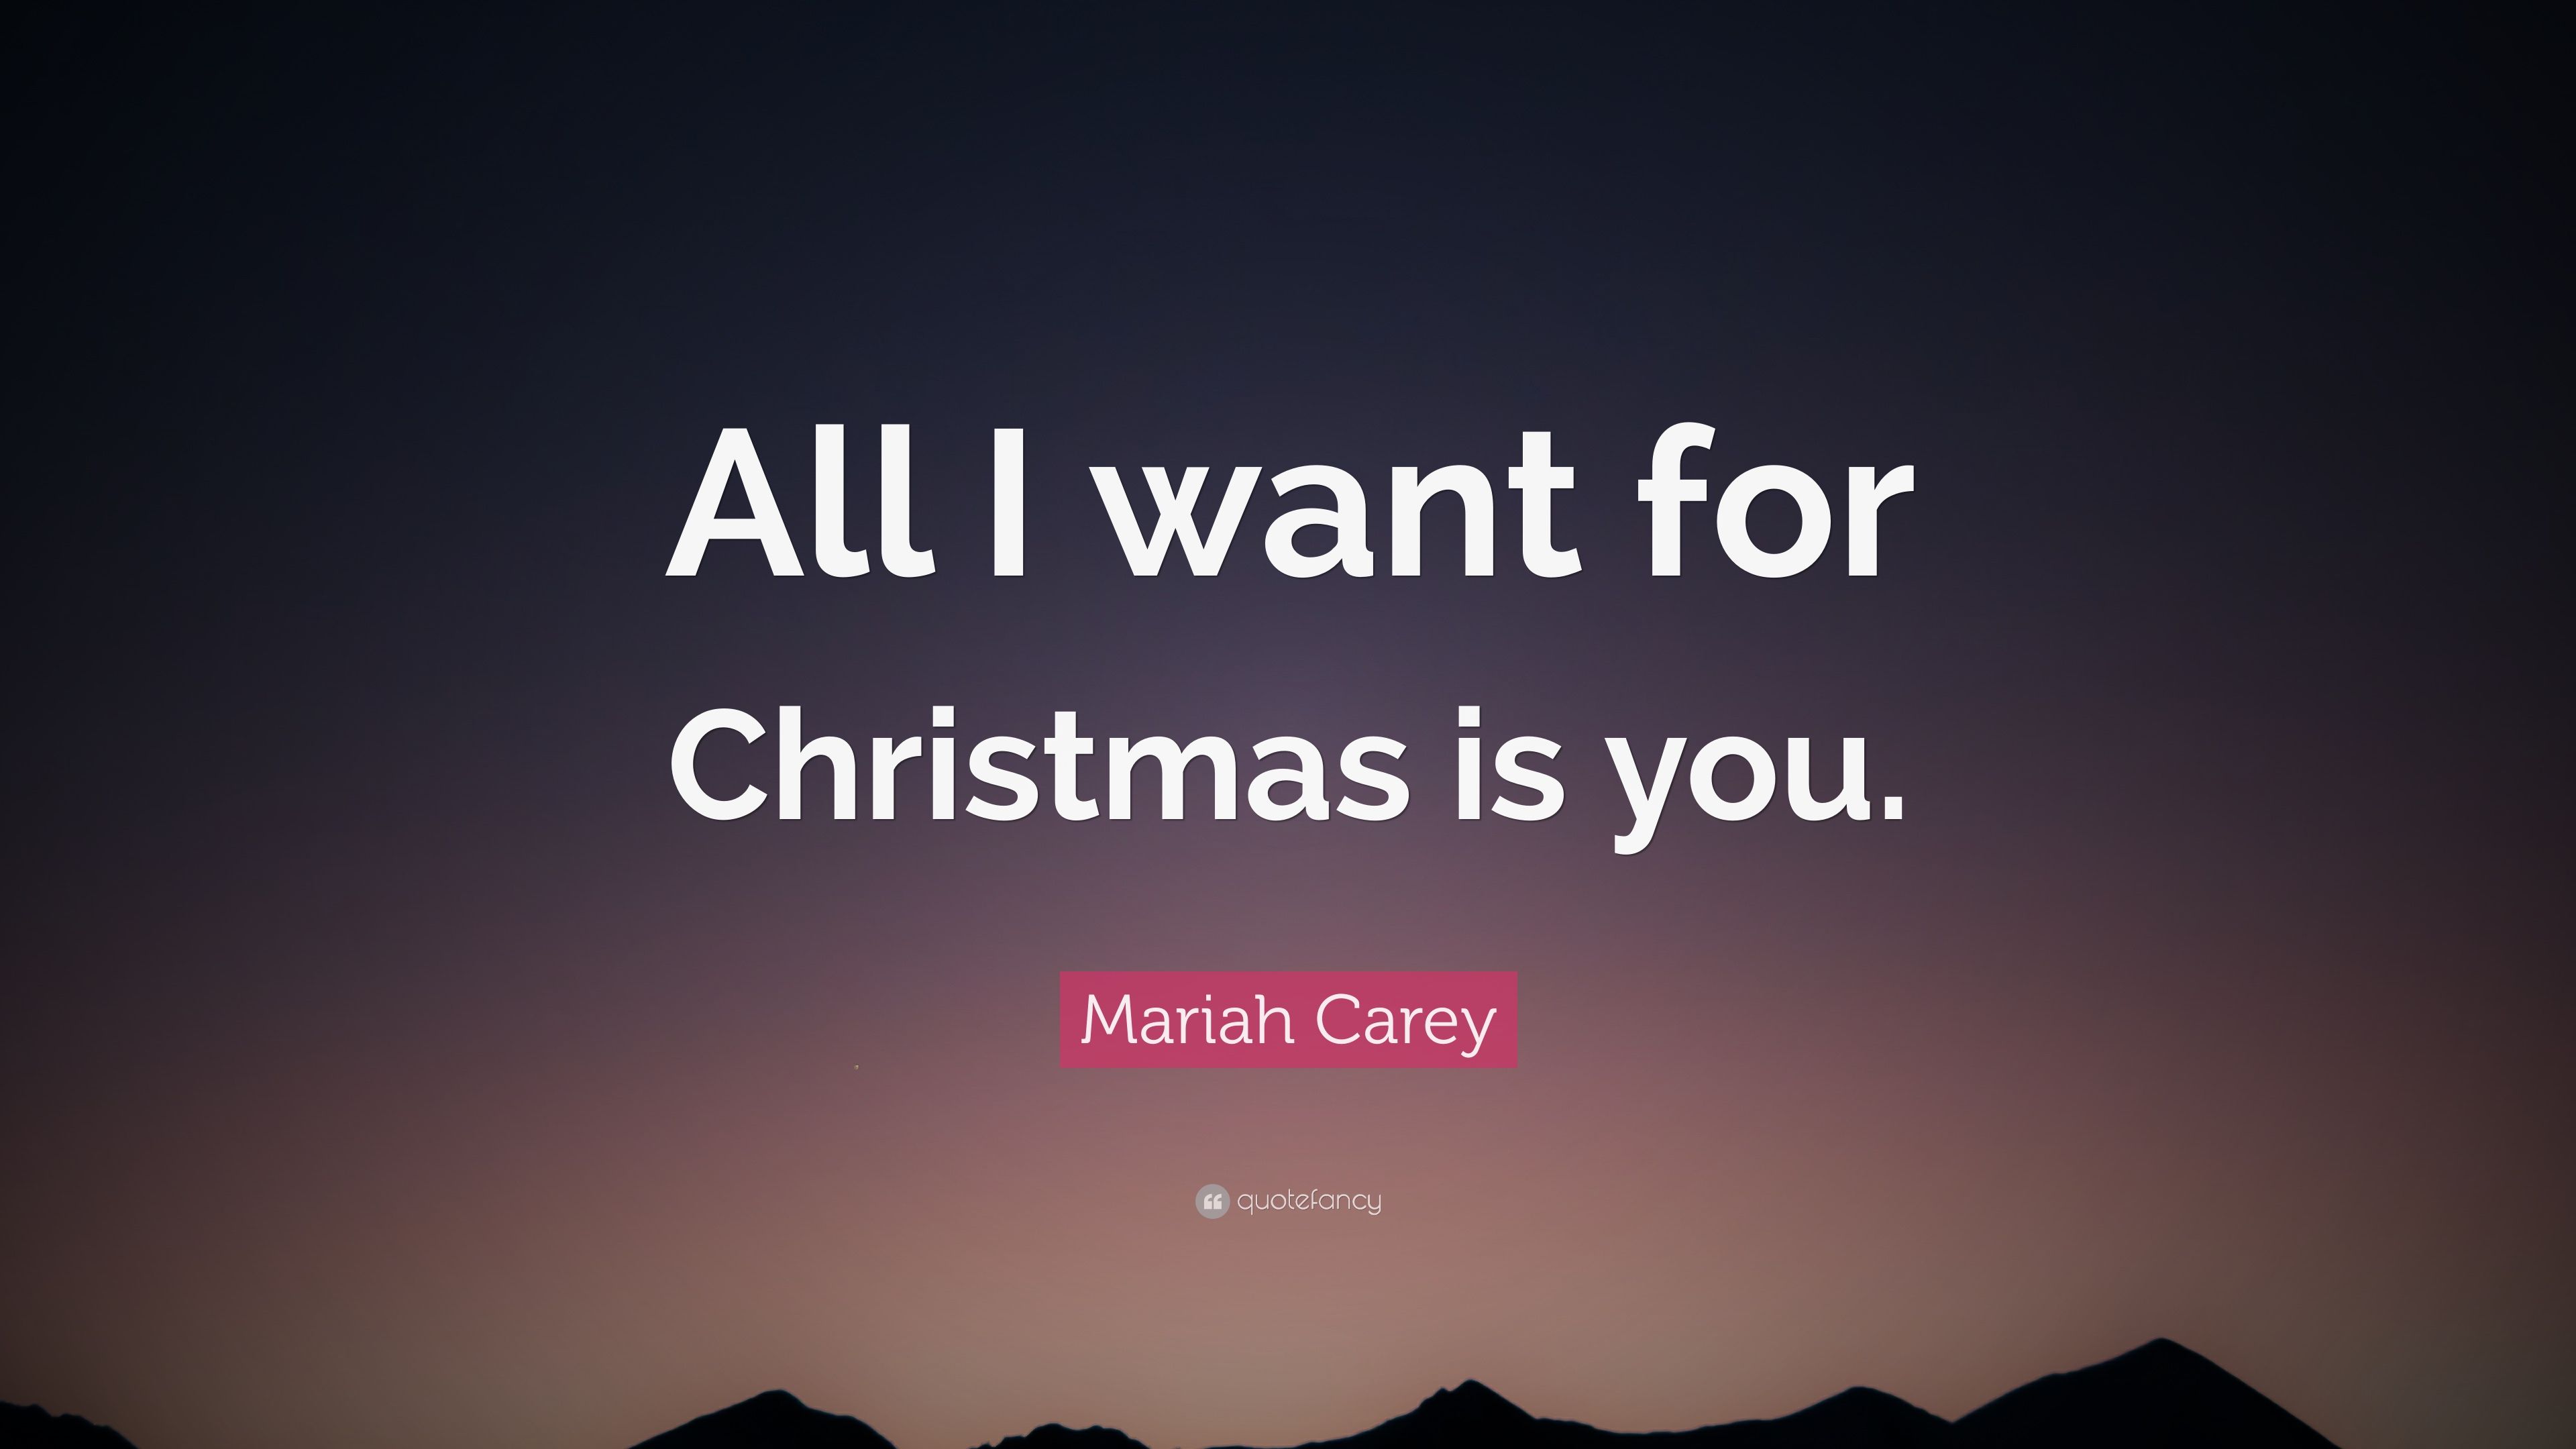 Mariah Carey Quote: “All I want for Christmas is you.” (15 wallpaper)